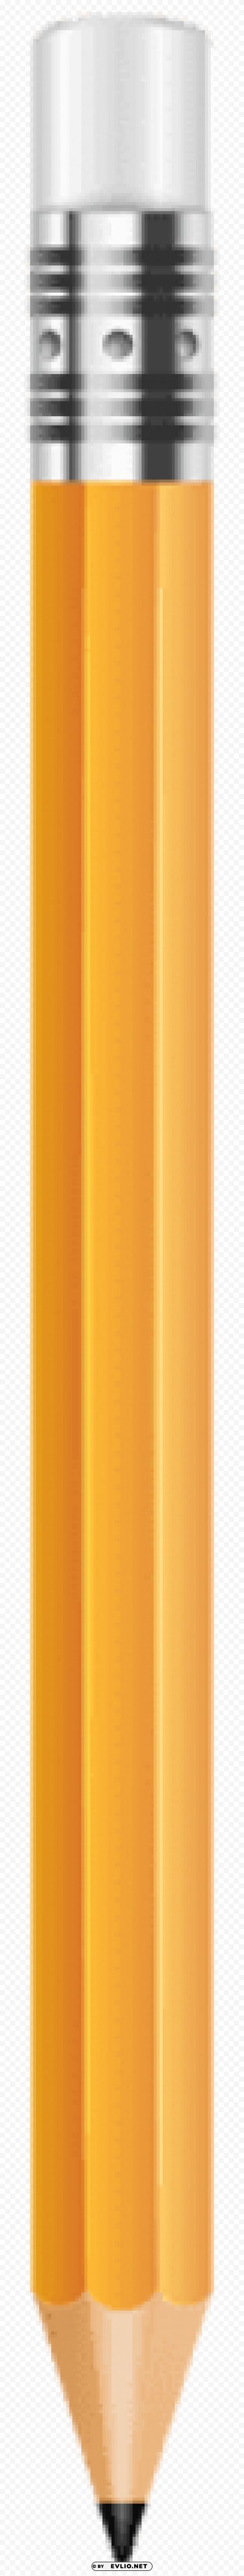 pencil Isolated Item on Transparent PNG